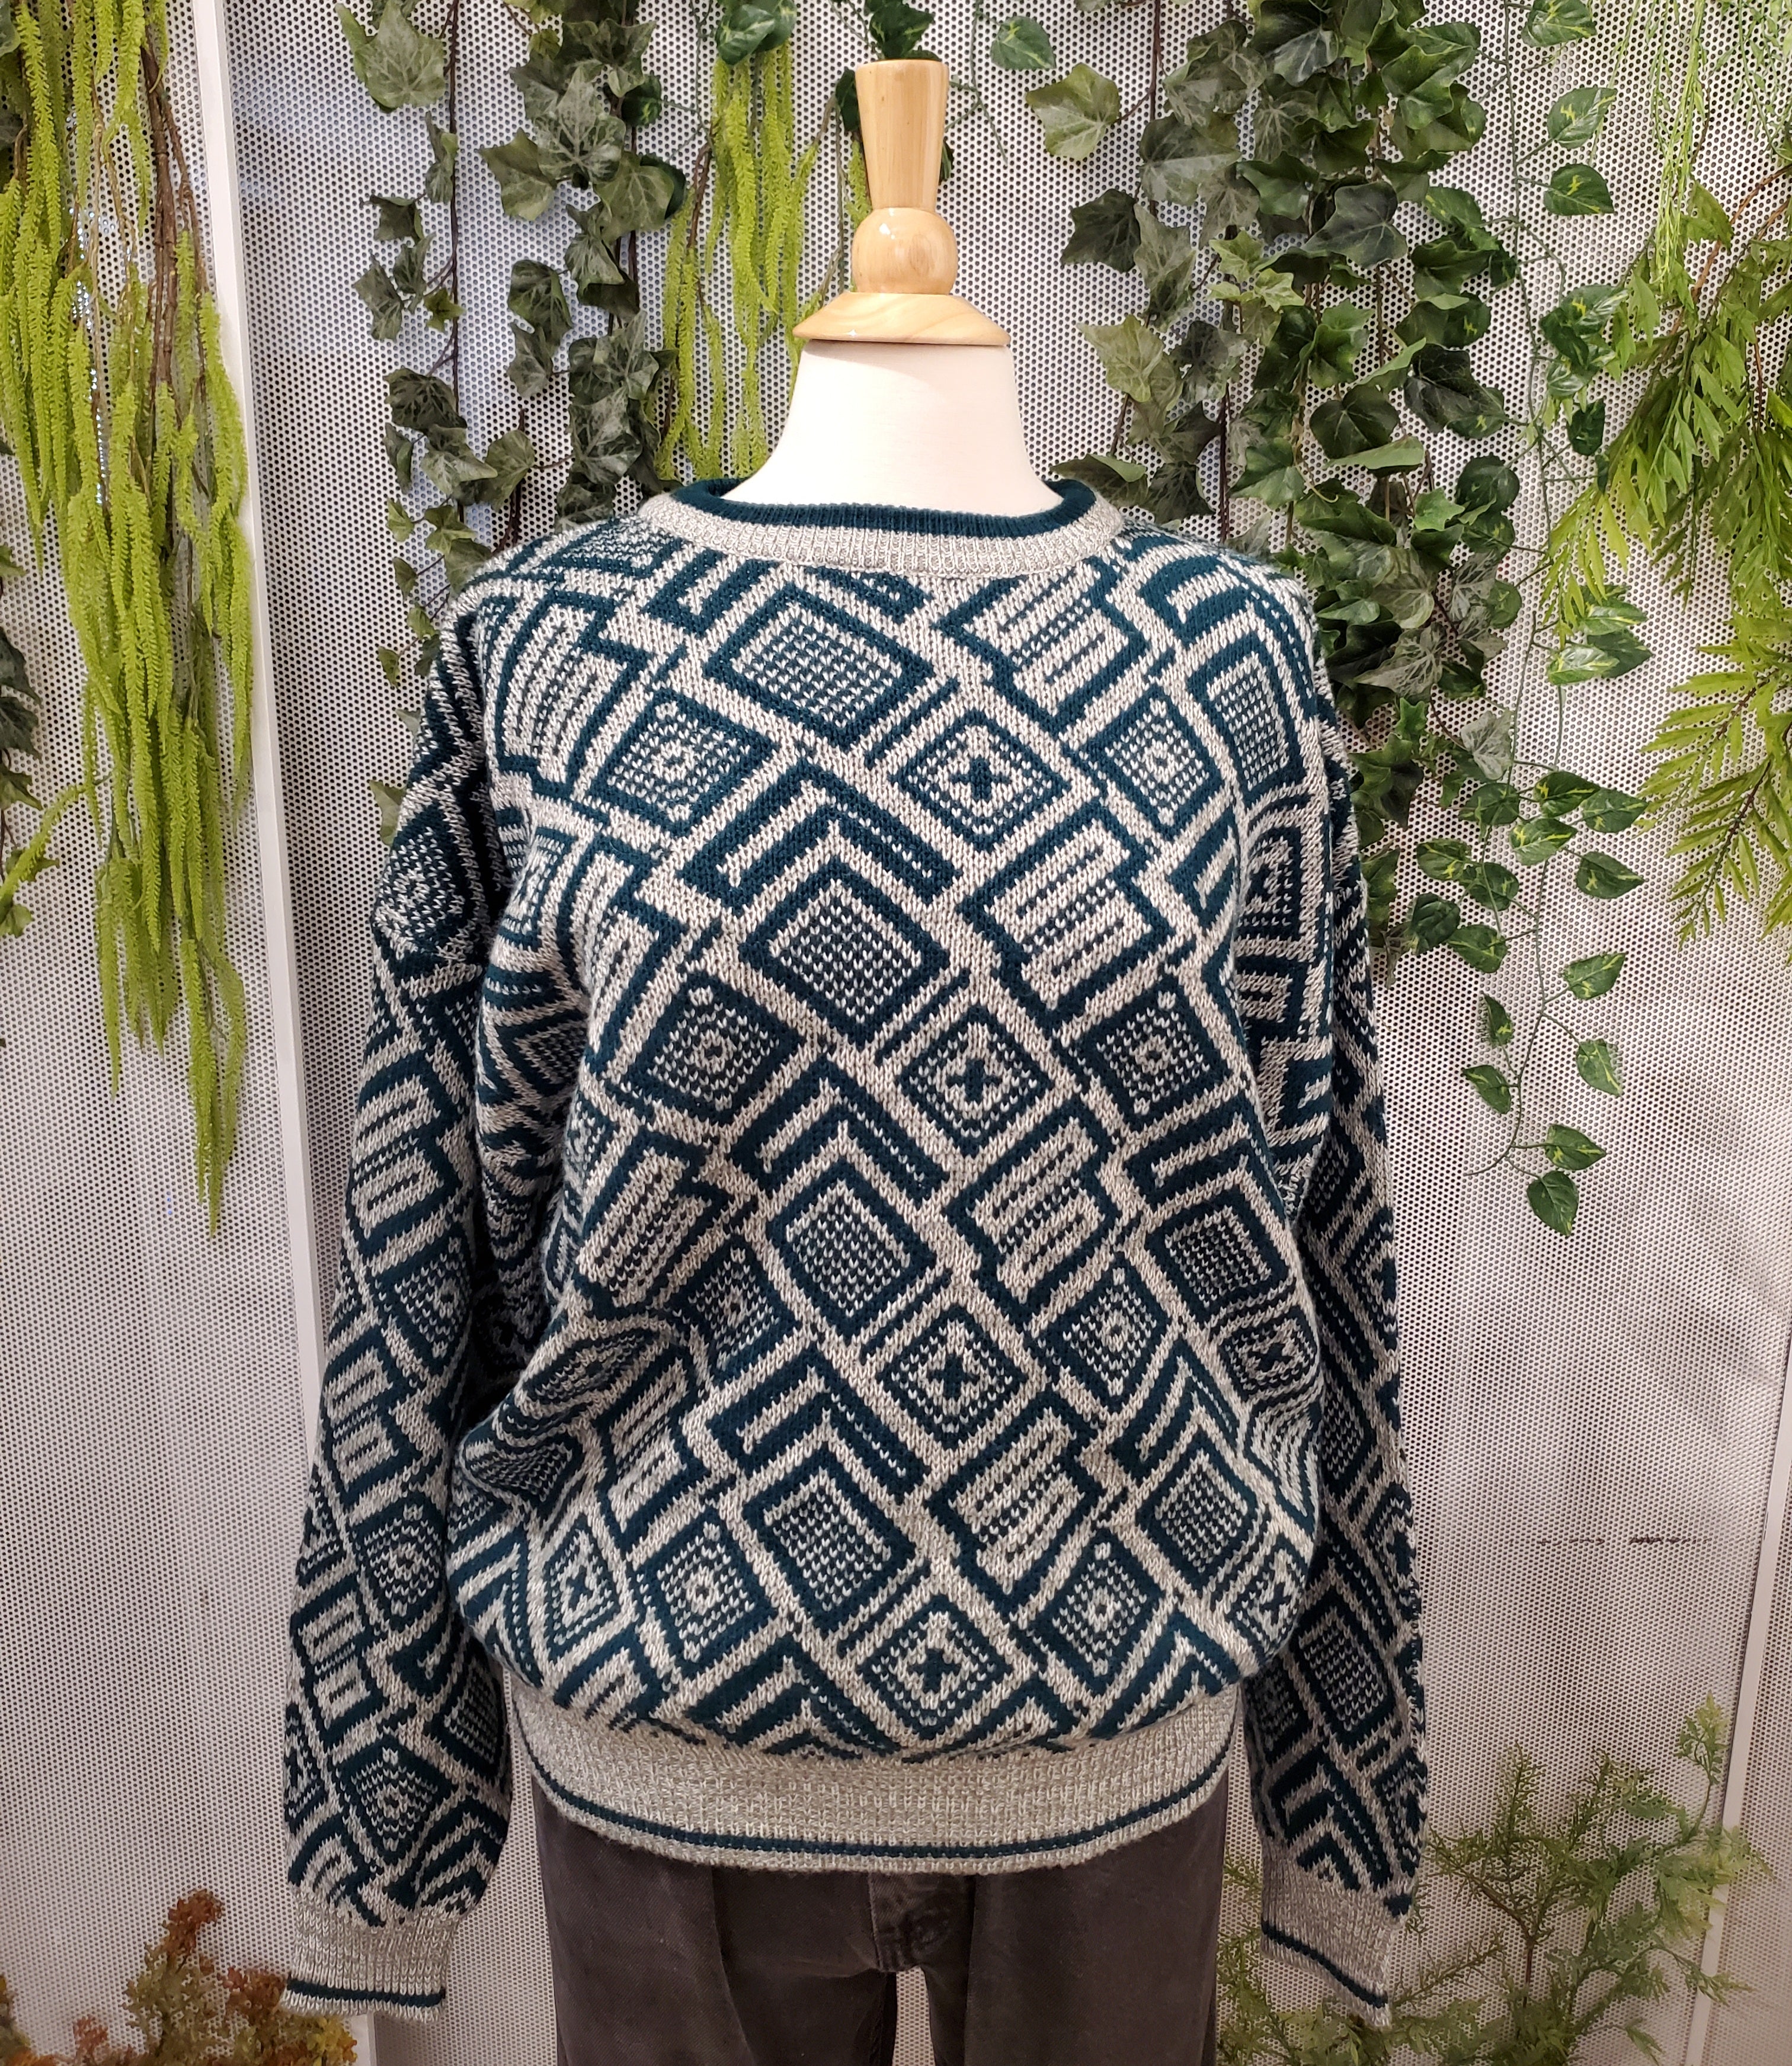 90’s Green Patterned Sweater